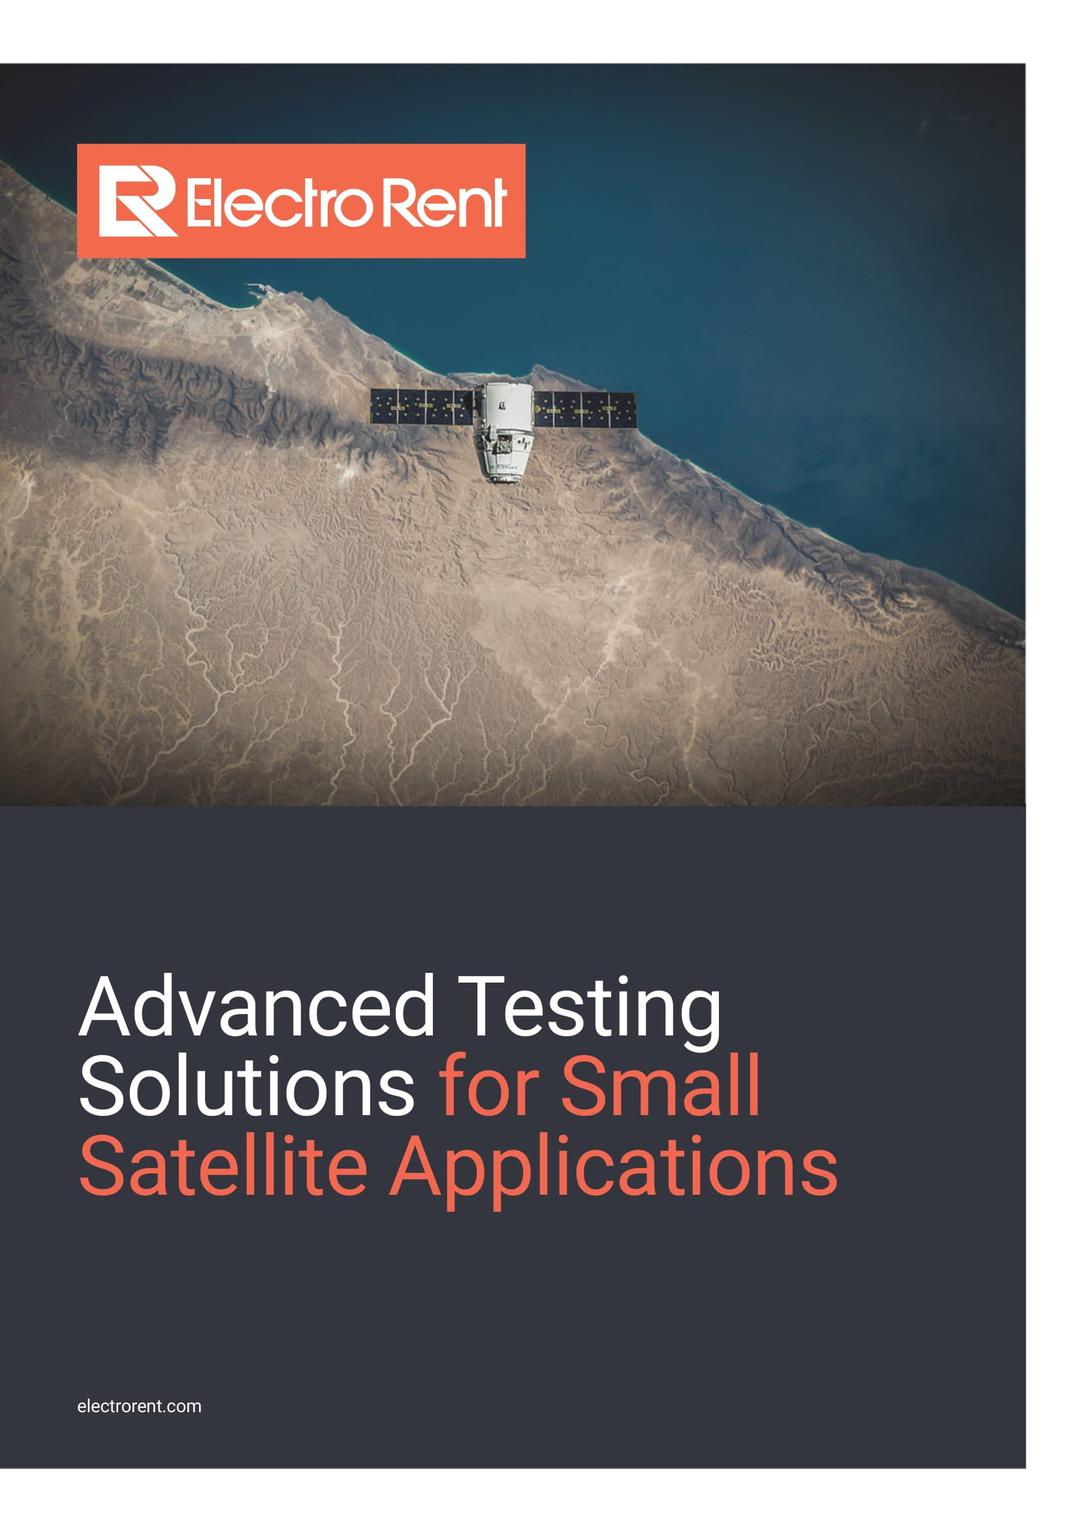 Advanced Testing Solutions for Small Satellite Applications, image